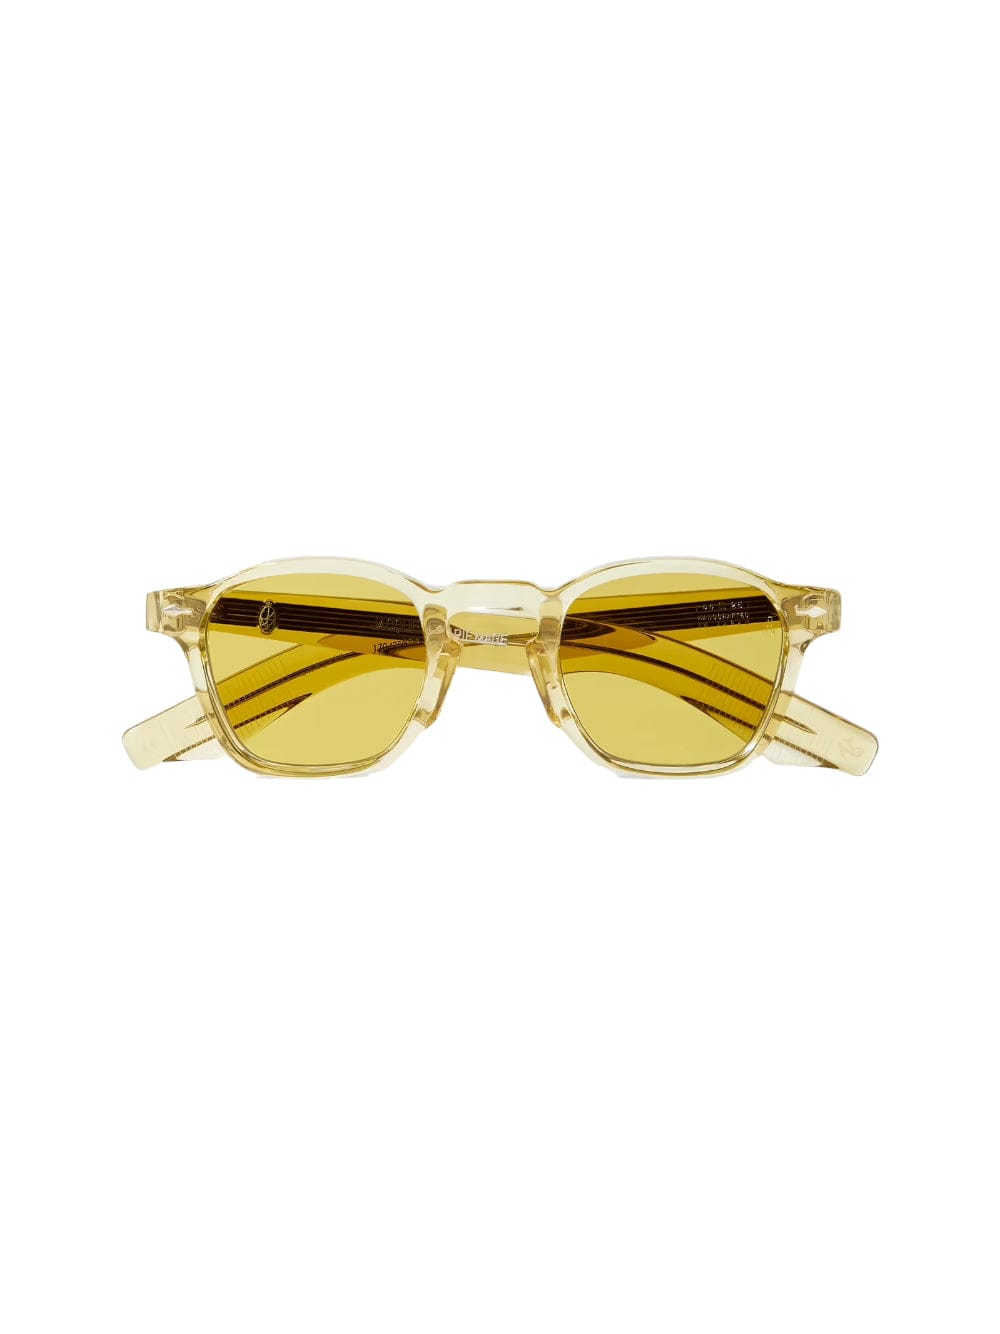 JACQUES MARIE MAGE ZEPHIRIN - YELLOW SUNGLASSES